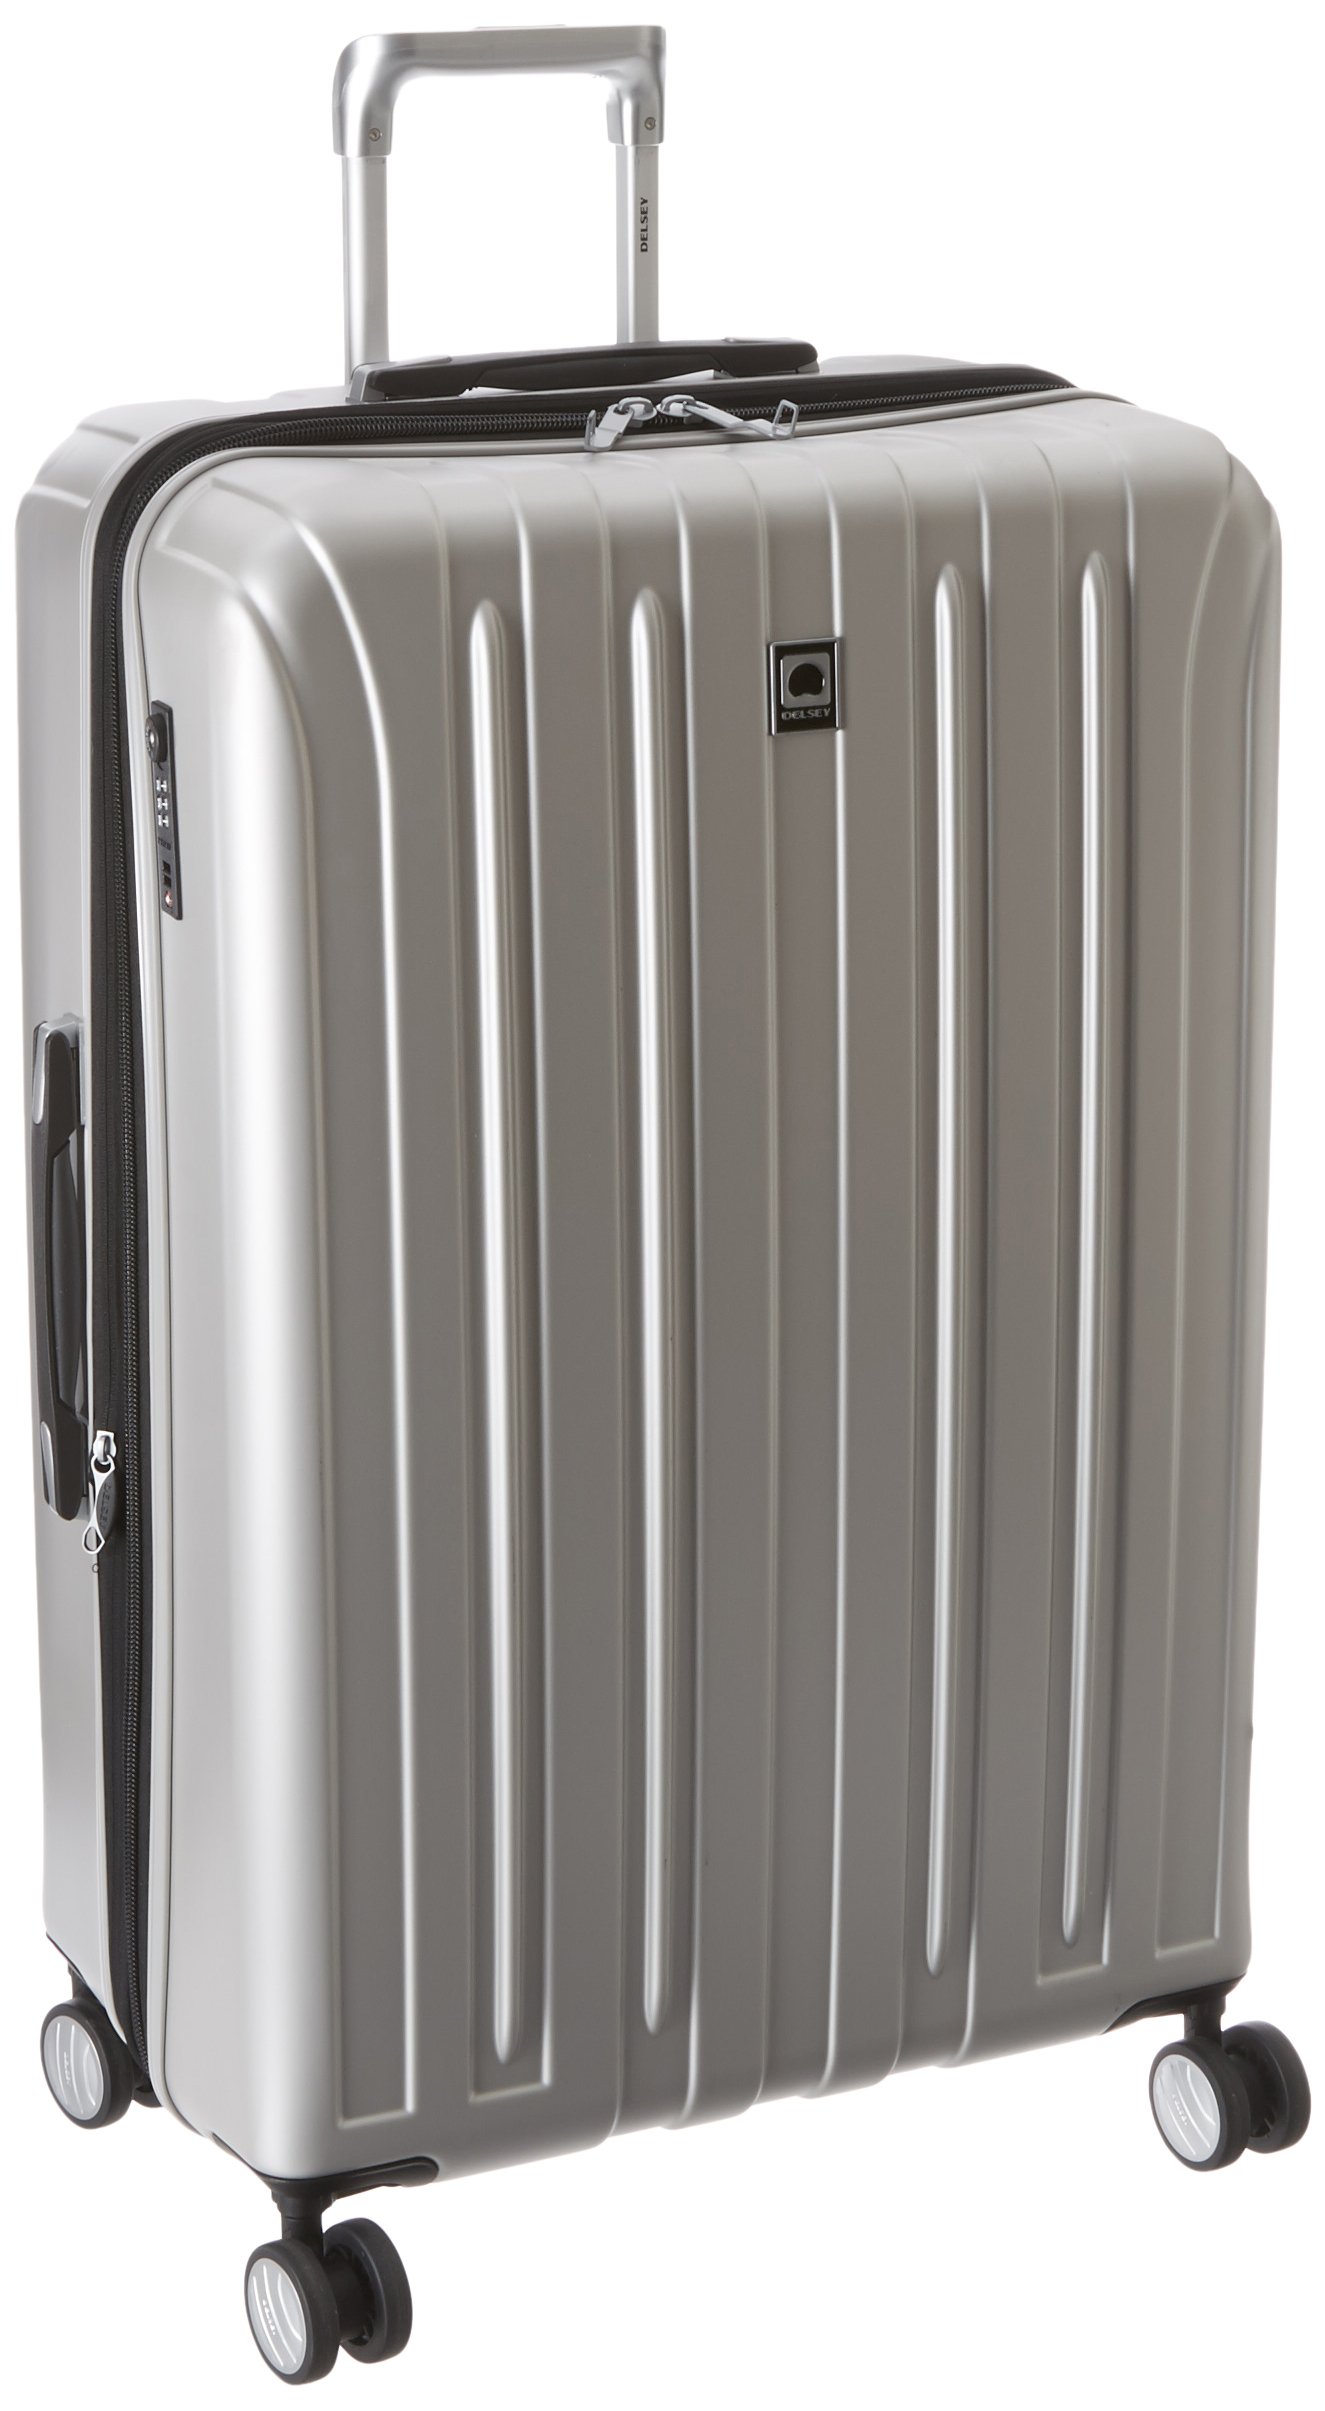 Delsey Paris Titanium Hardside Expandable Luggage With Spinner Wheels, Silver, Checked-Large 29 Inch,207183011